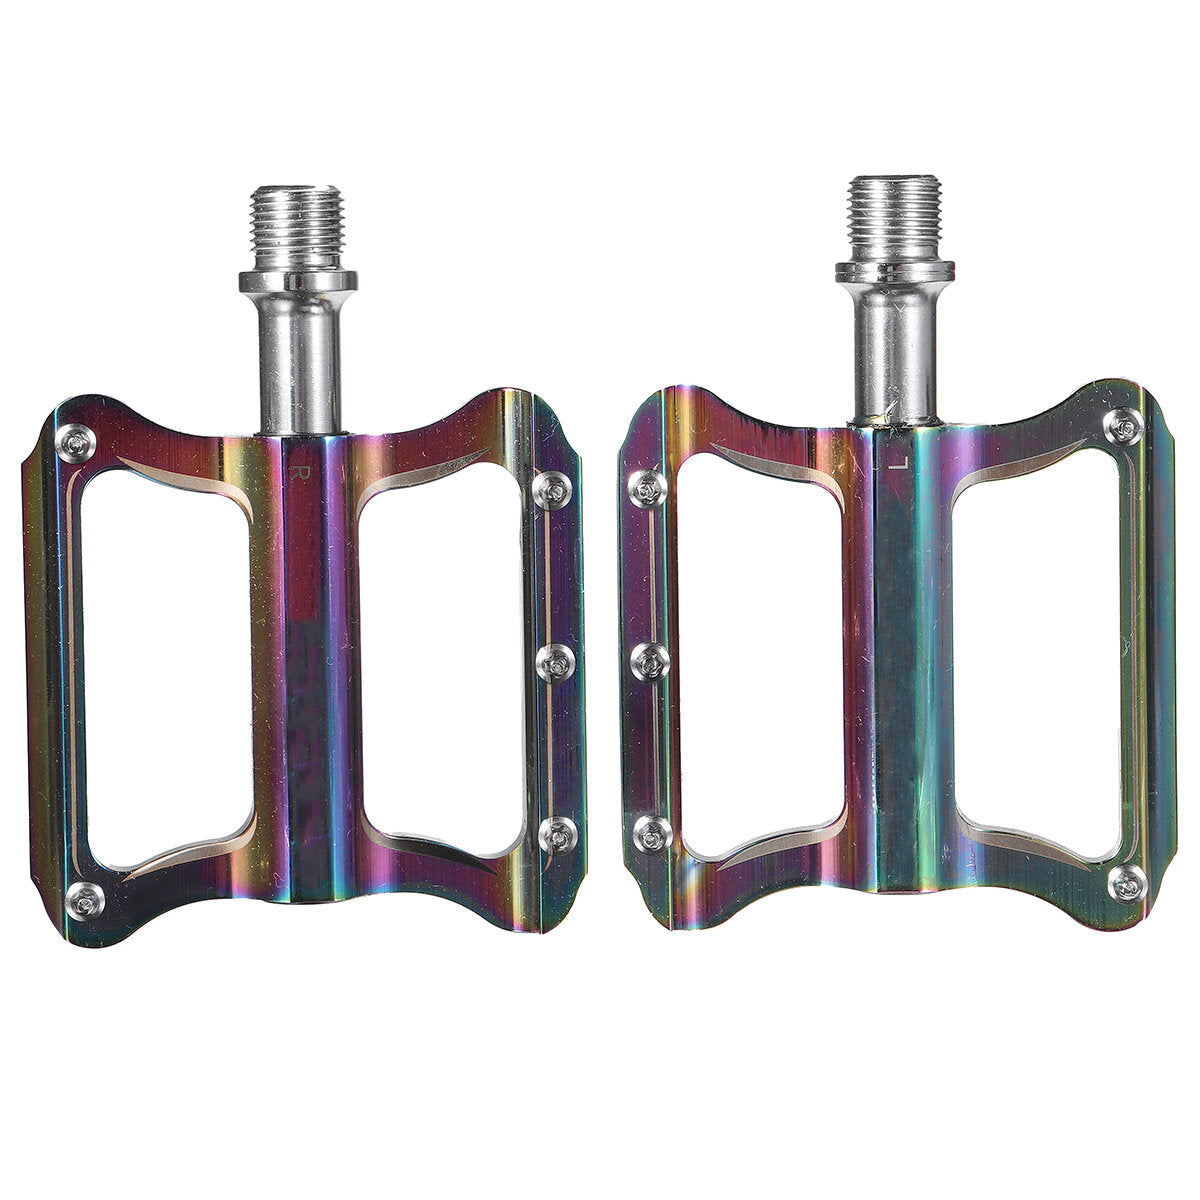 1 Pair Of Bike Pedals Anti-slip Mountain Road Bike Platform Aluminum Alloy Bicycle Flat Foot Platform Outdoor Cycling Bicycle Pedals